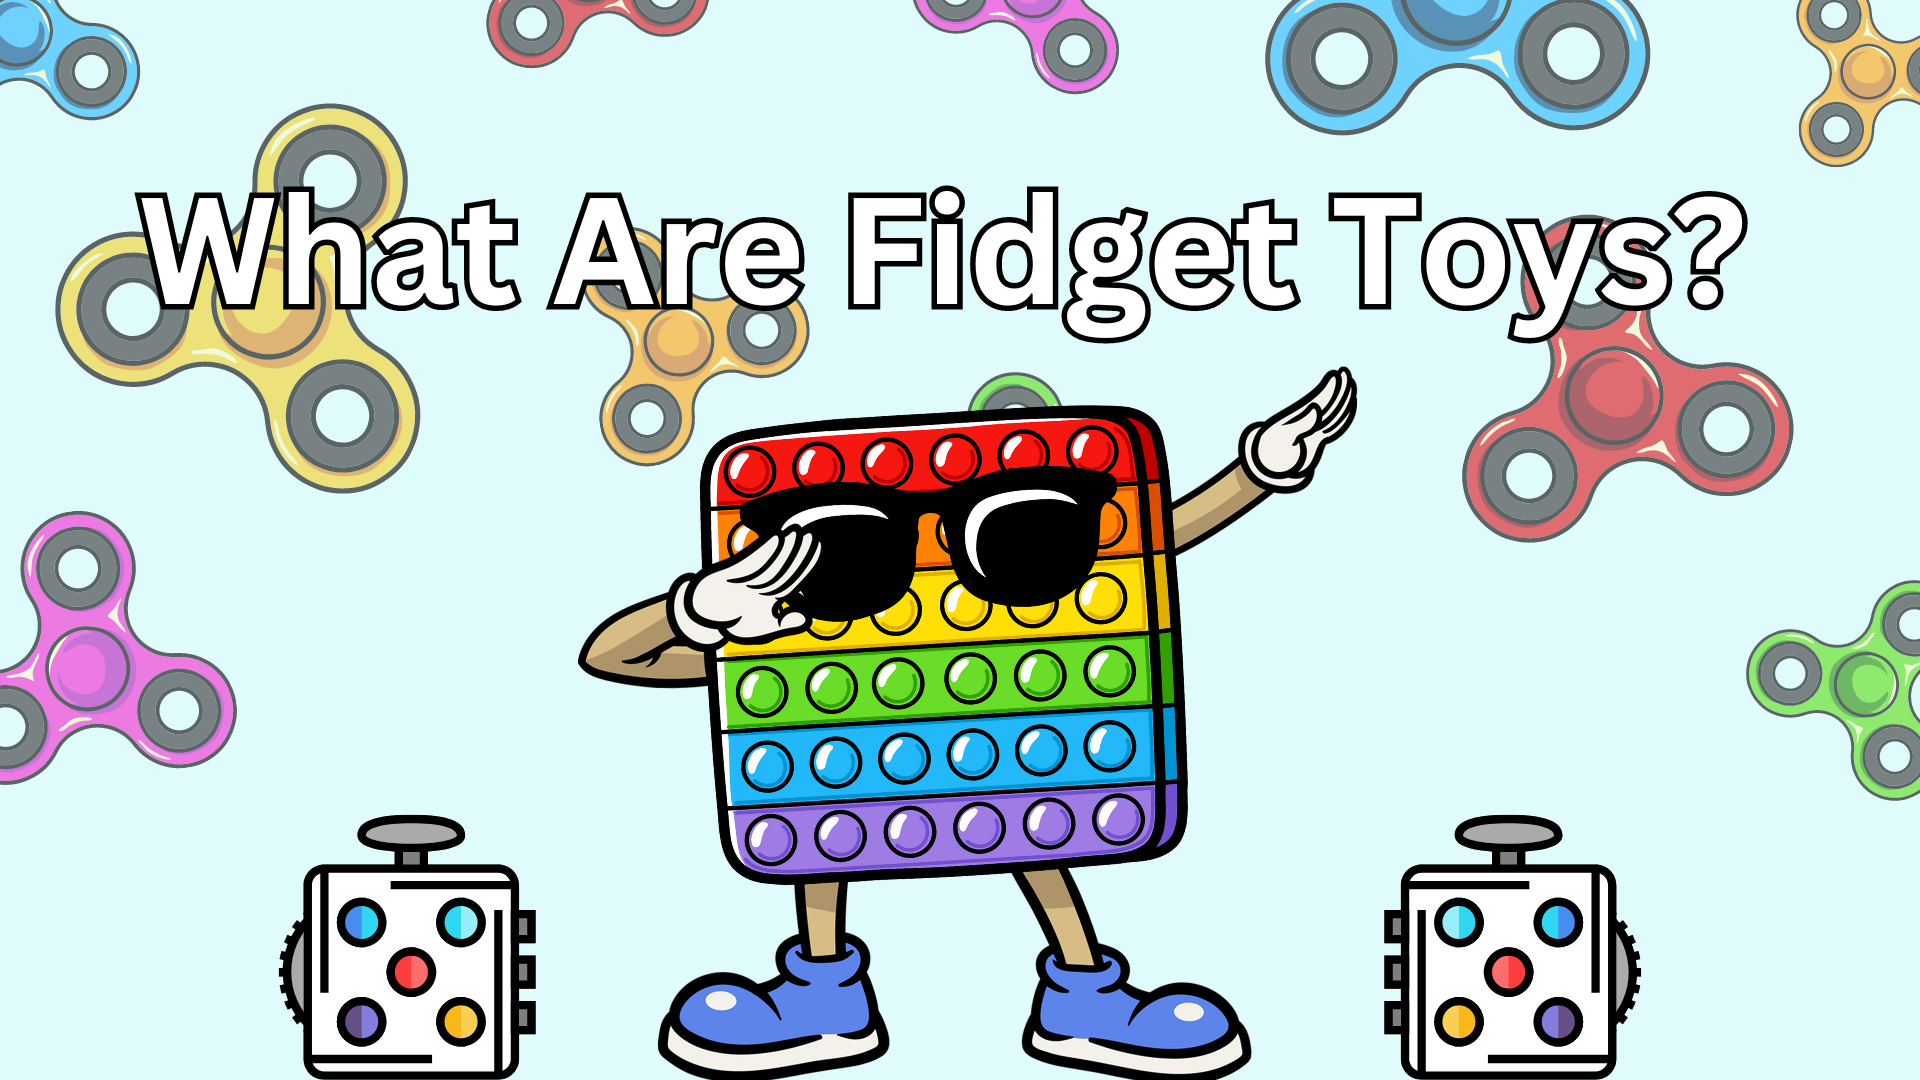 What are fidget toys? What are the best fidget toys?